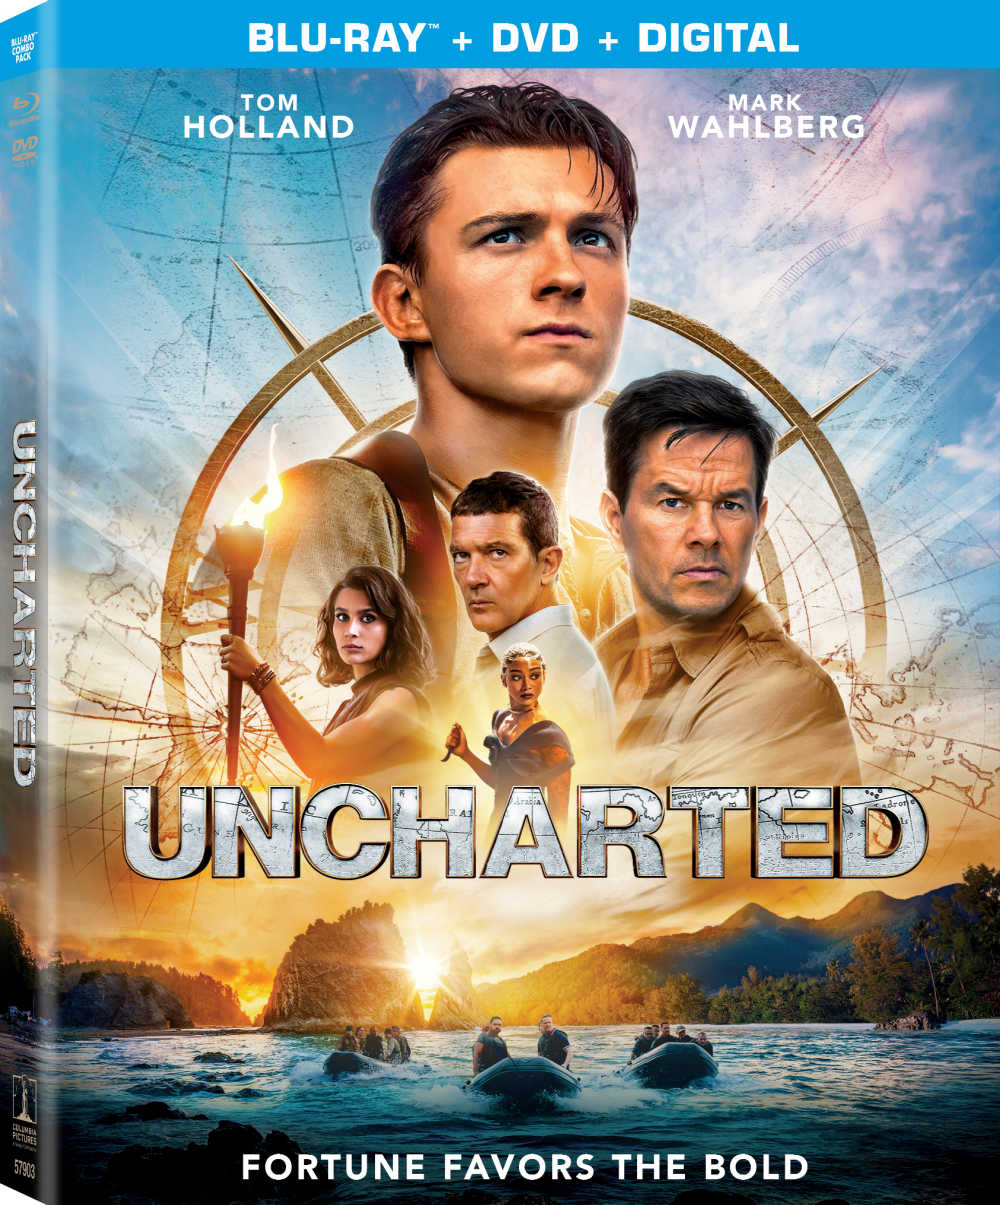 It's time for action and adventure, since Uncharted (the movie based on the video game series) is now available for home viewing. 